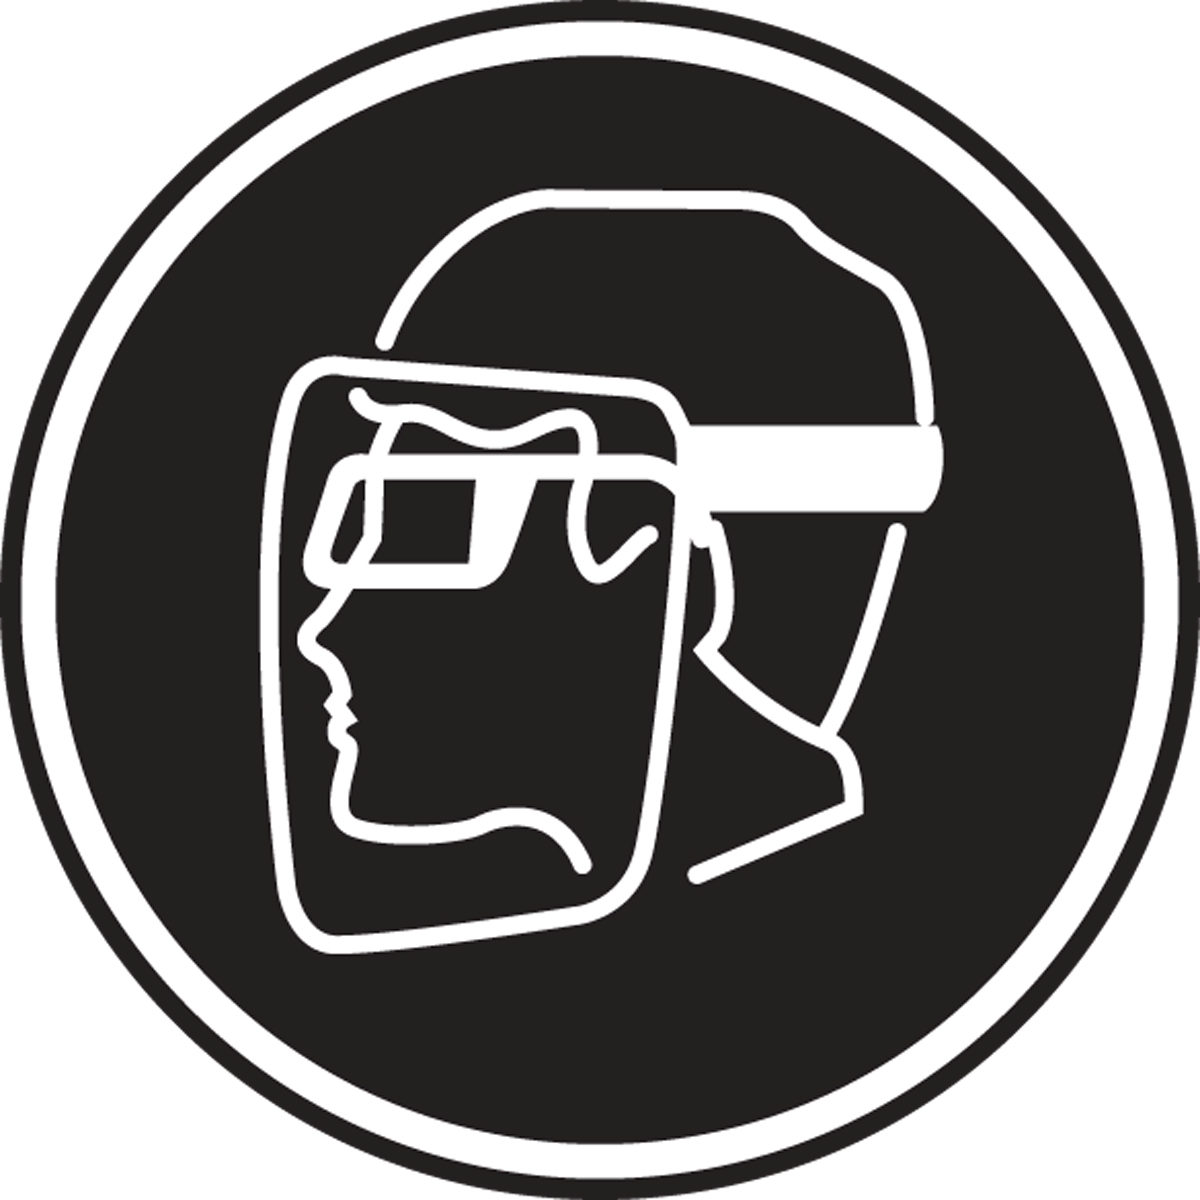 FACE PROTECTION REQUIRED GRAPHIC